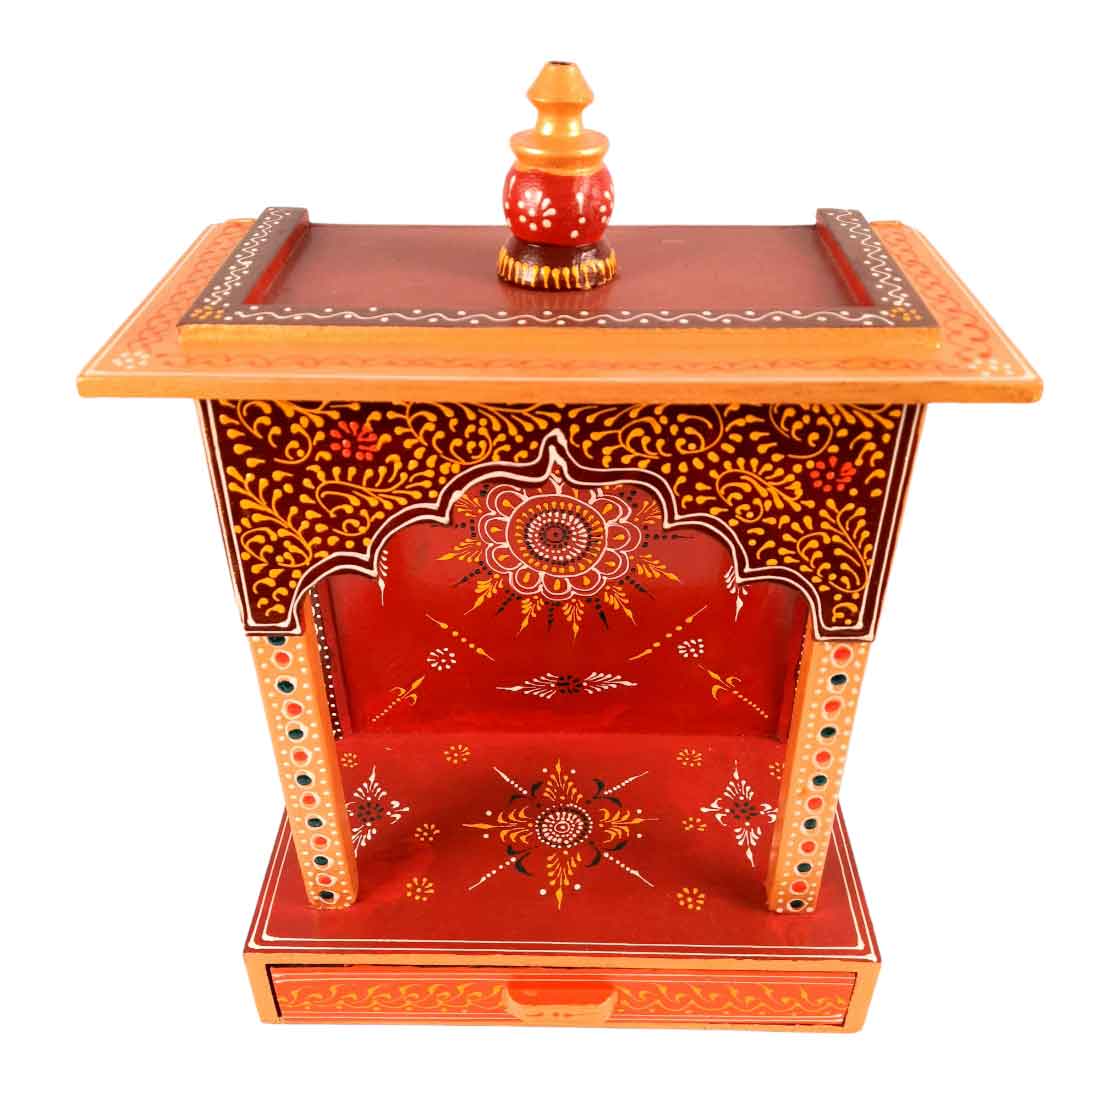 Pooja Mandir Unit | Home Temple With Drawer | Wooden Wall Mounted Home Temple With Storage with detachable gumbad - for God, House, Puja Ghar, Office & Shop -17 Inch